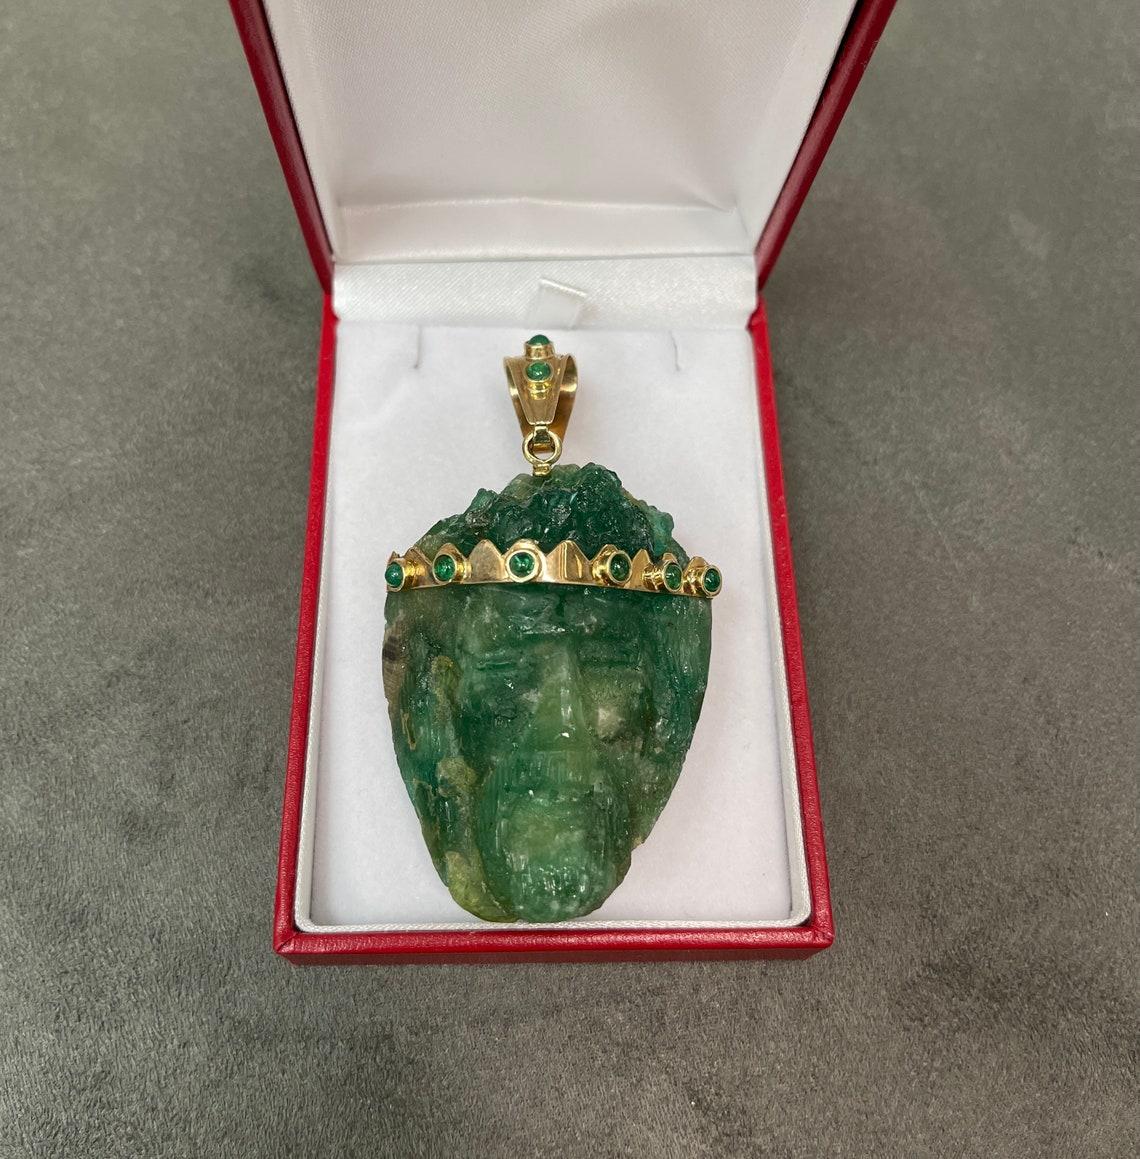 Showcased is a rare, rough emerald crystal pendant. 57 total carat weight of genuine, rough, Colombian emerald crystal is perfectly capped by smooth yellow gold and cabochon emerald bezel. The piece is semi-transparent and has a rich green color